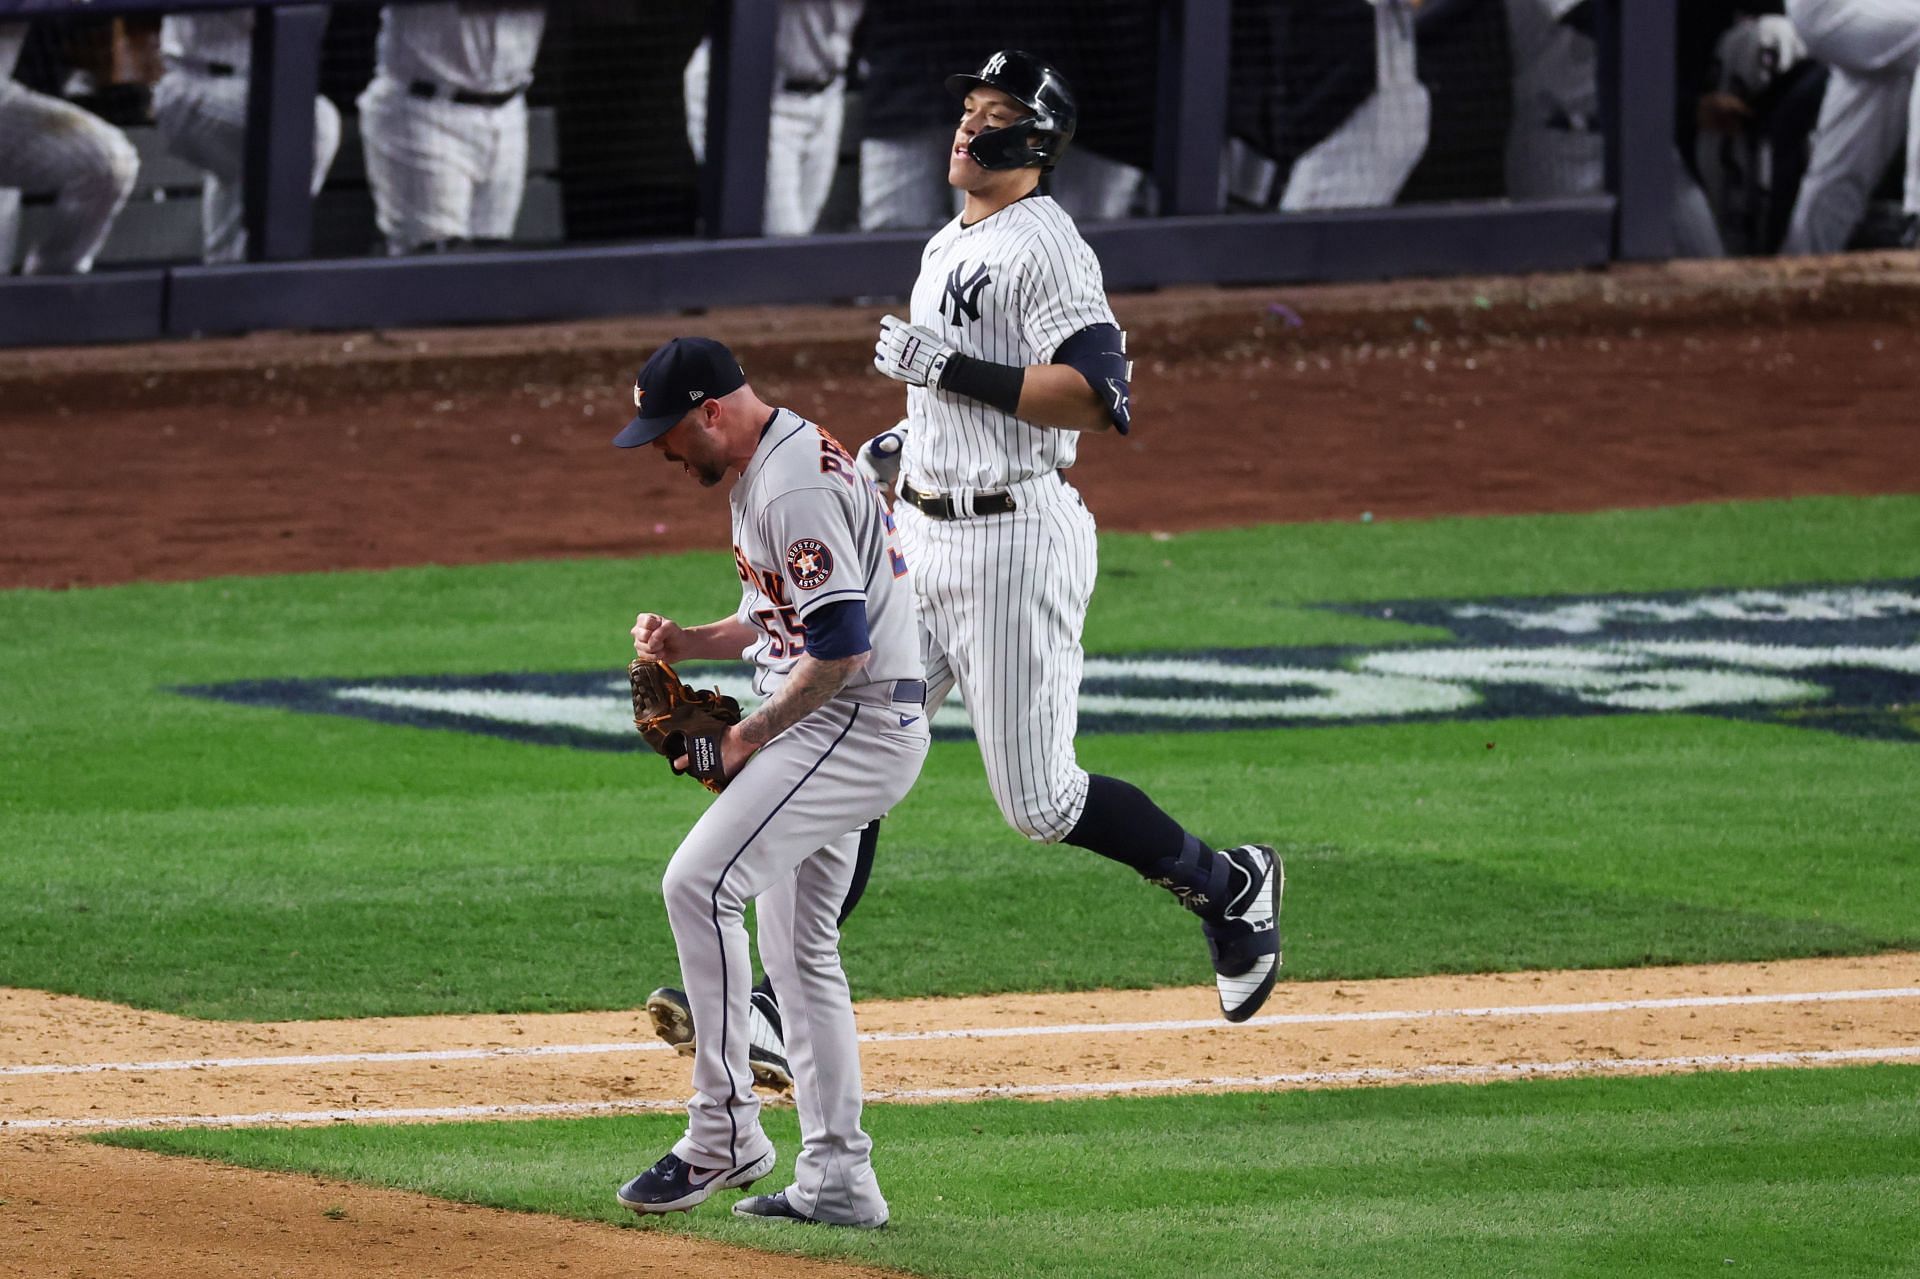 The Yankees lost to the Astros in the ALCS